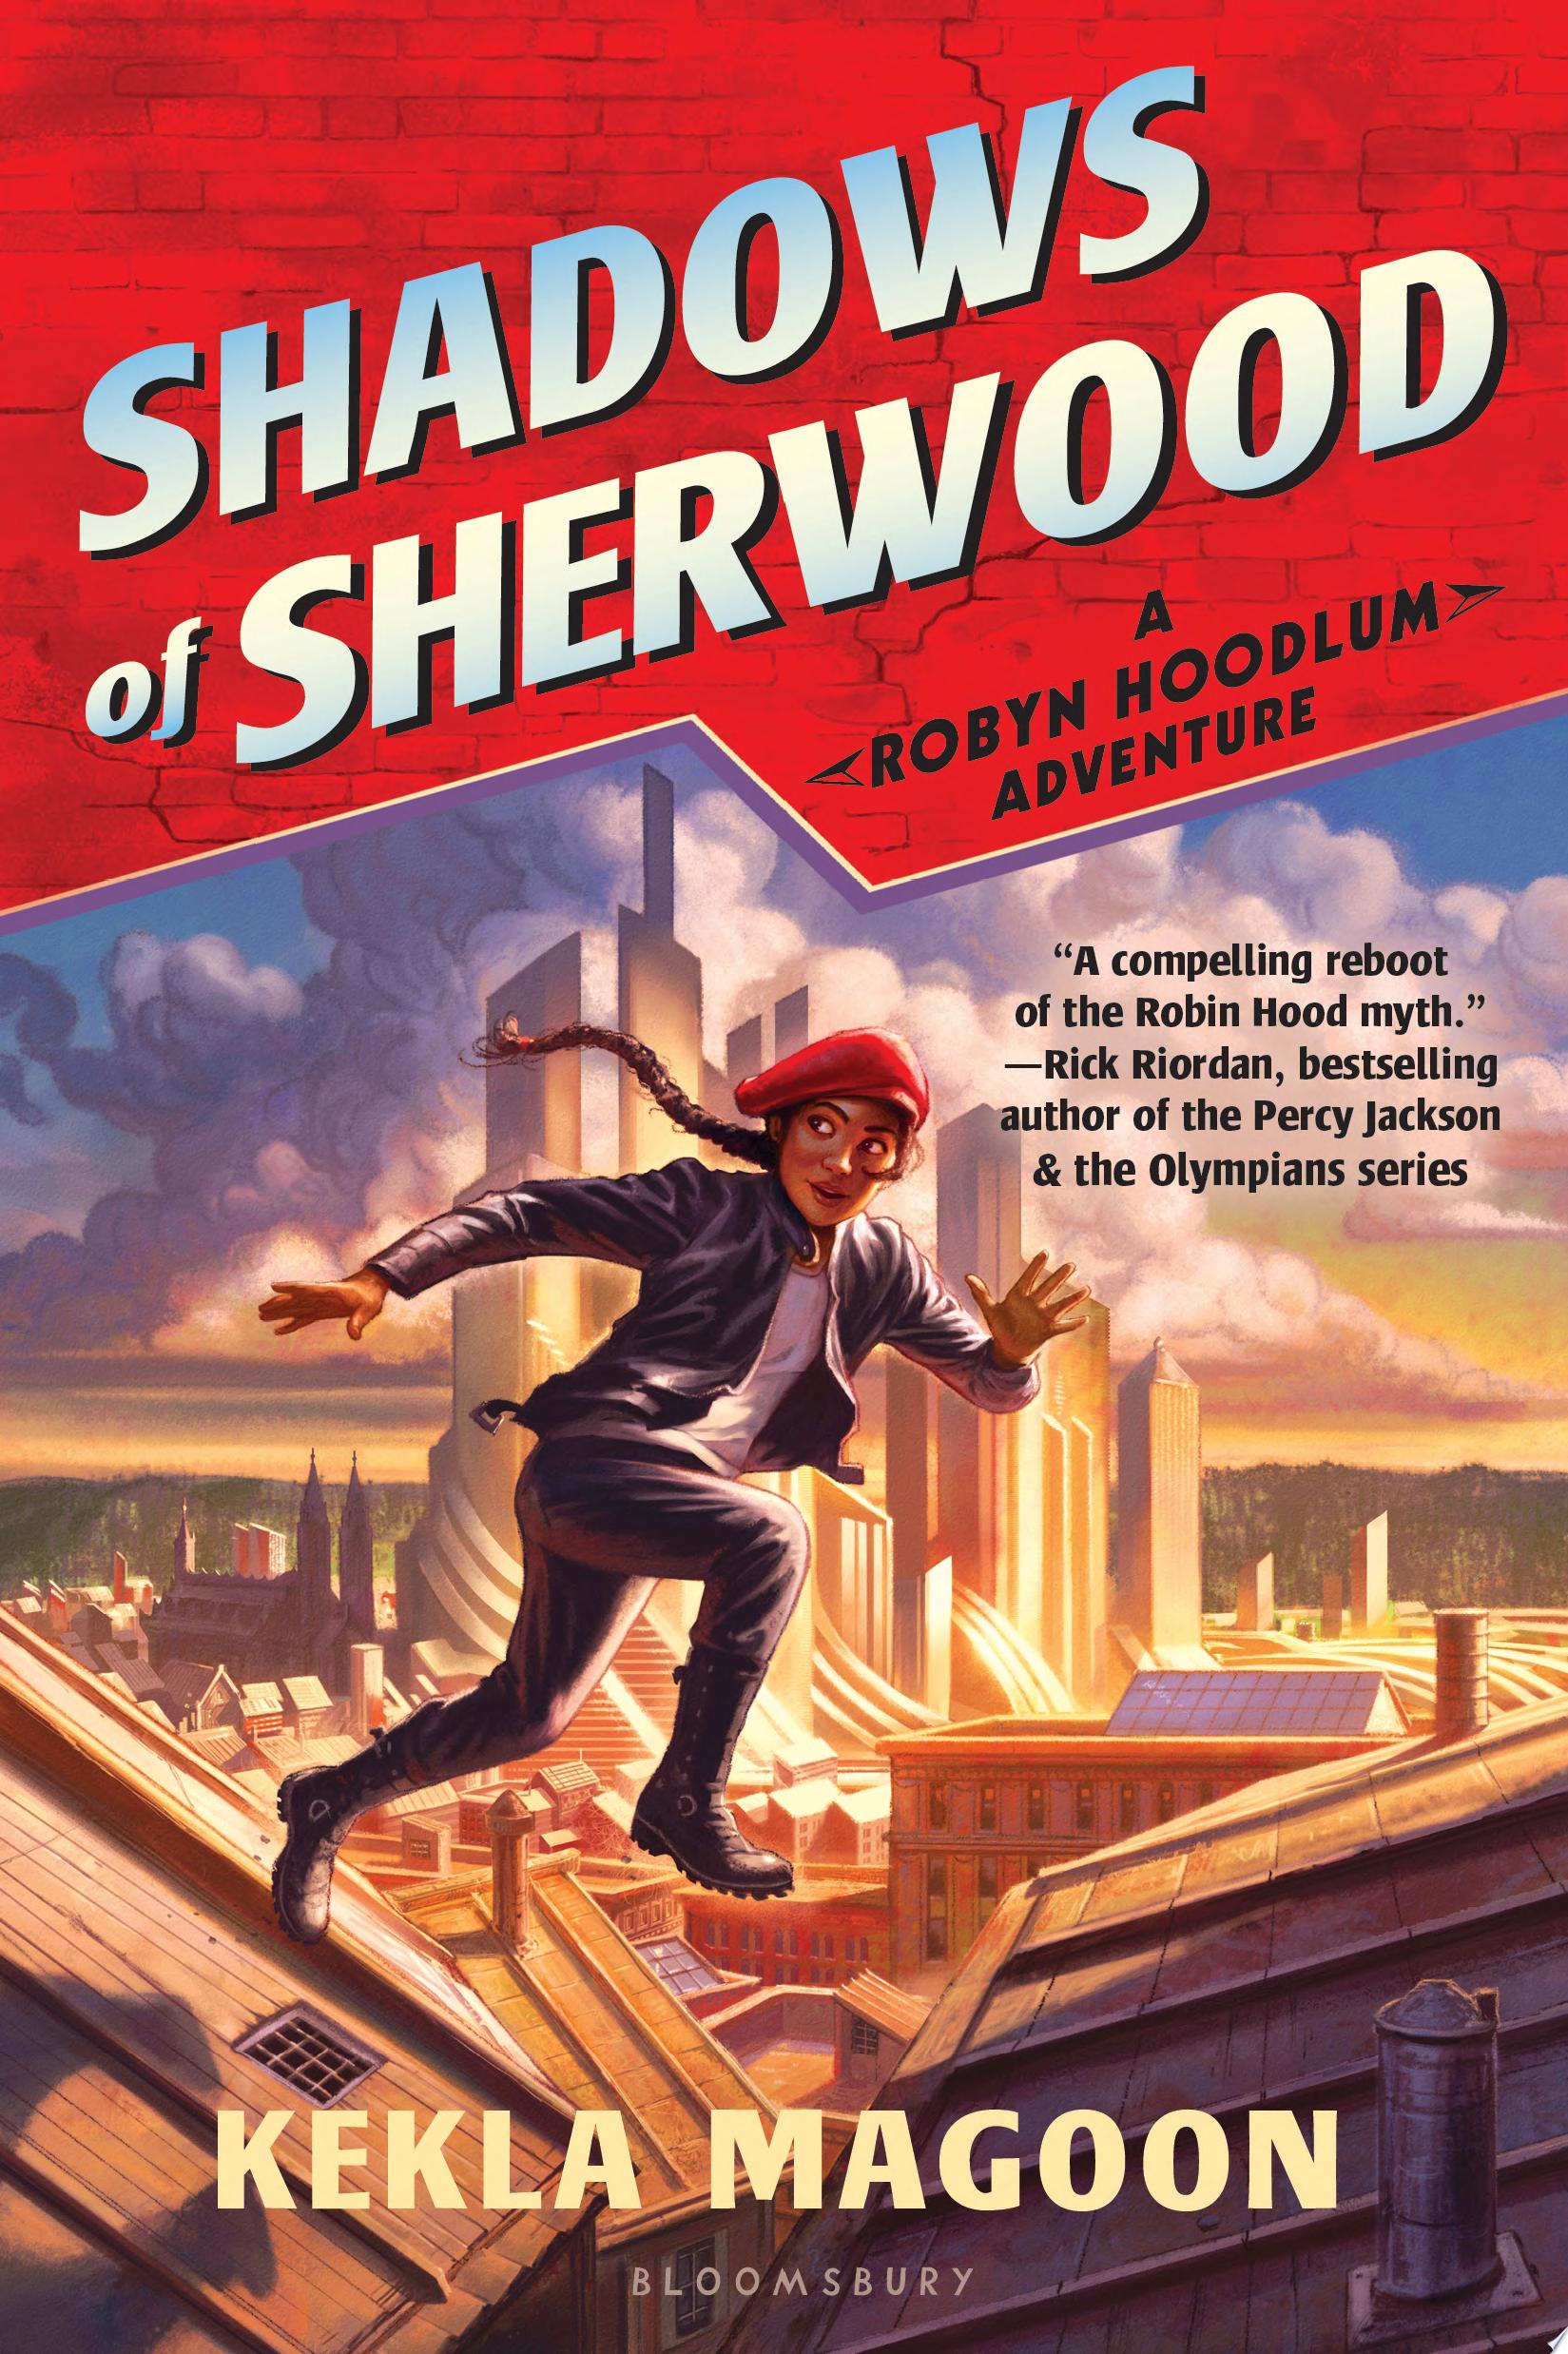 Image for "Shadows of Sherwood"